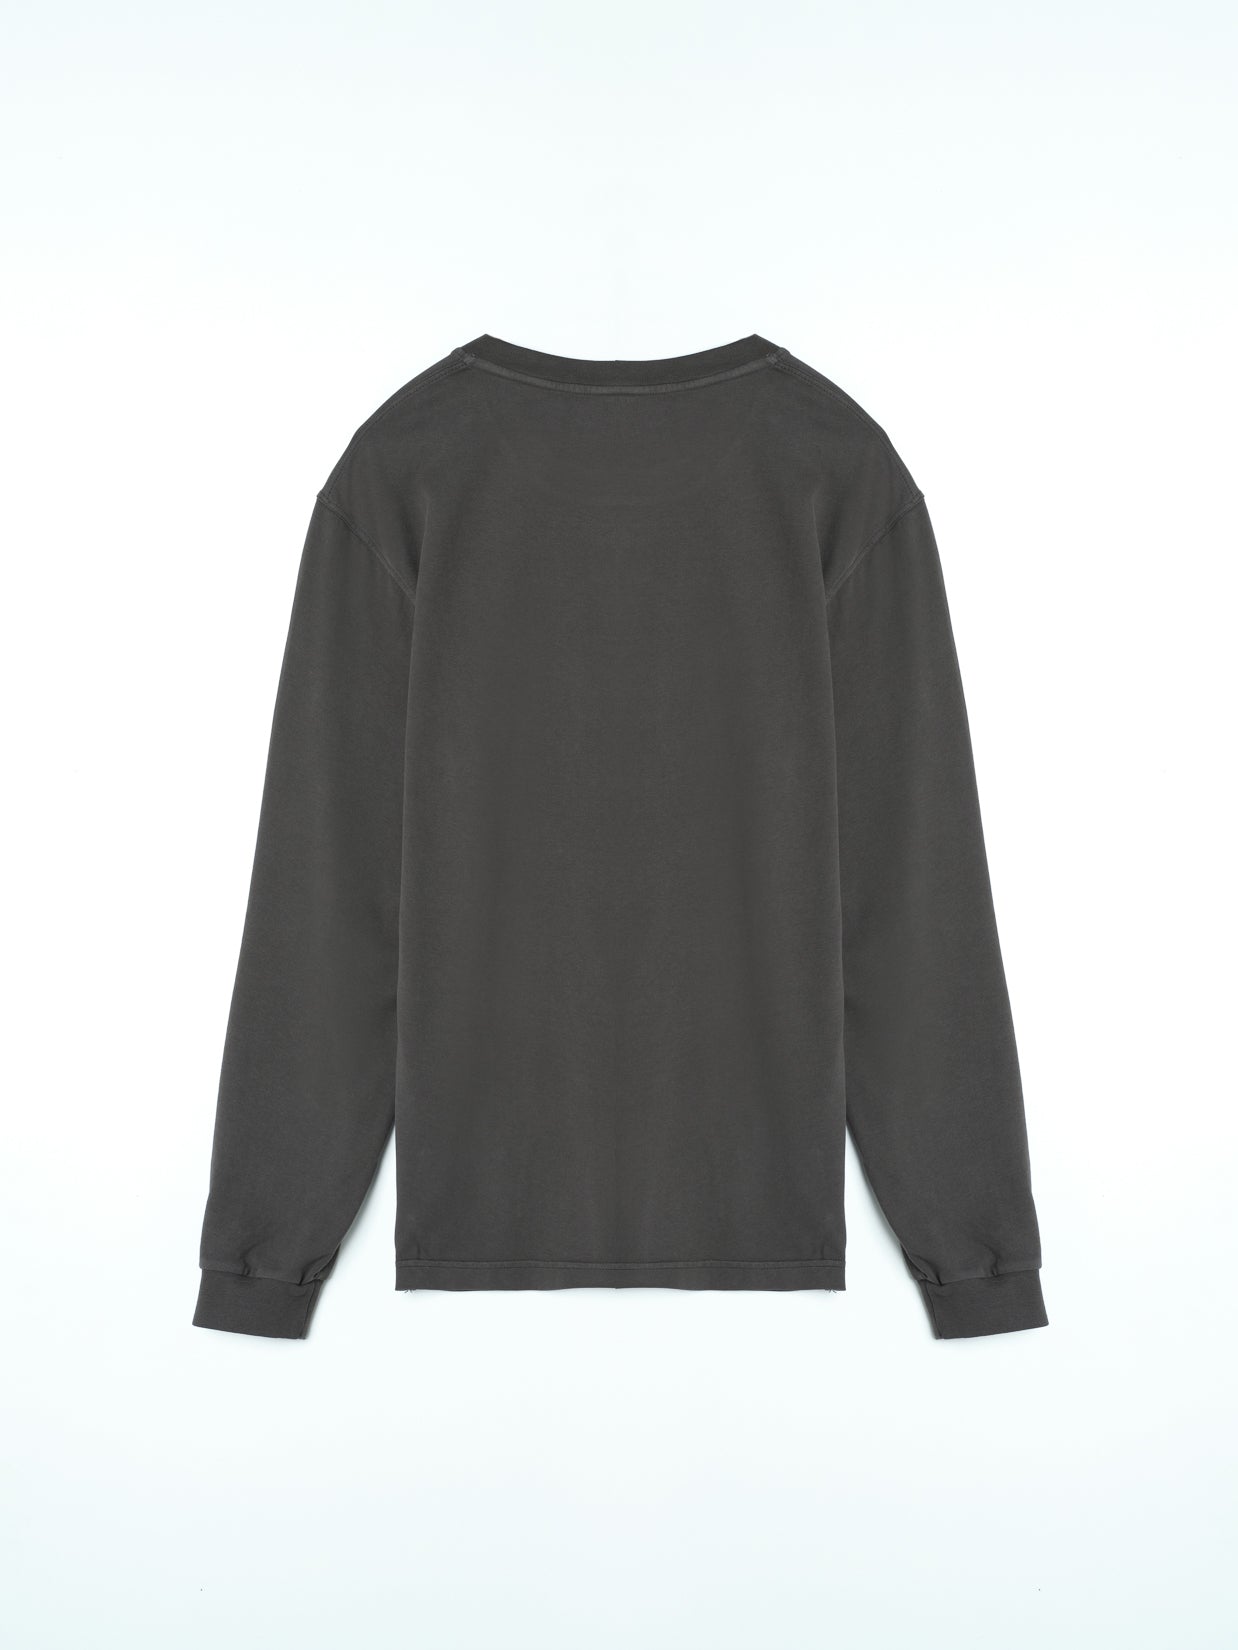 250/335 - Men's Long sleeve with Carbon Finish